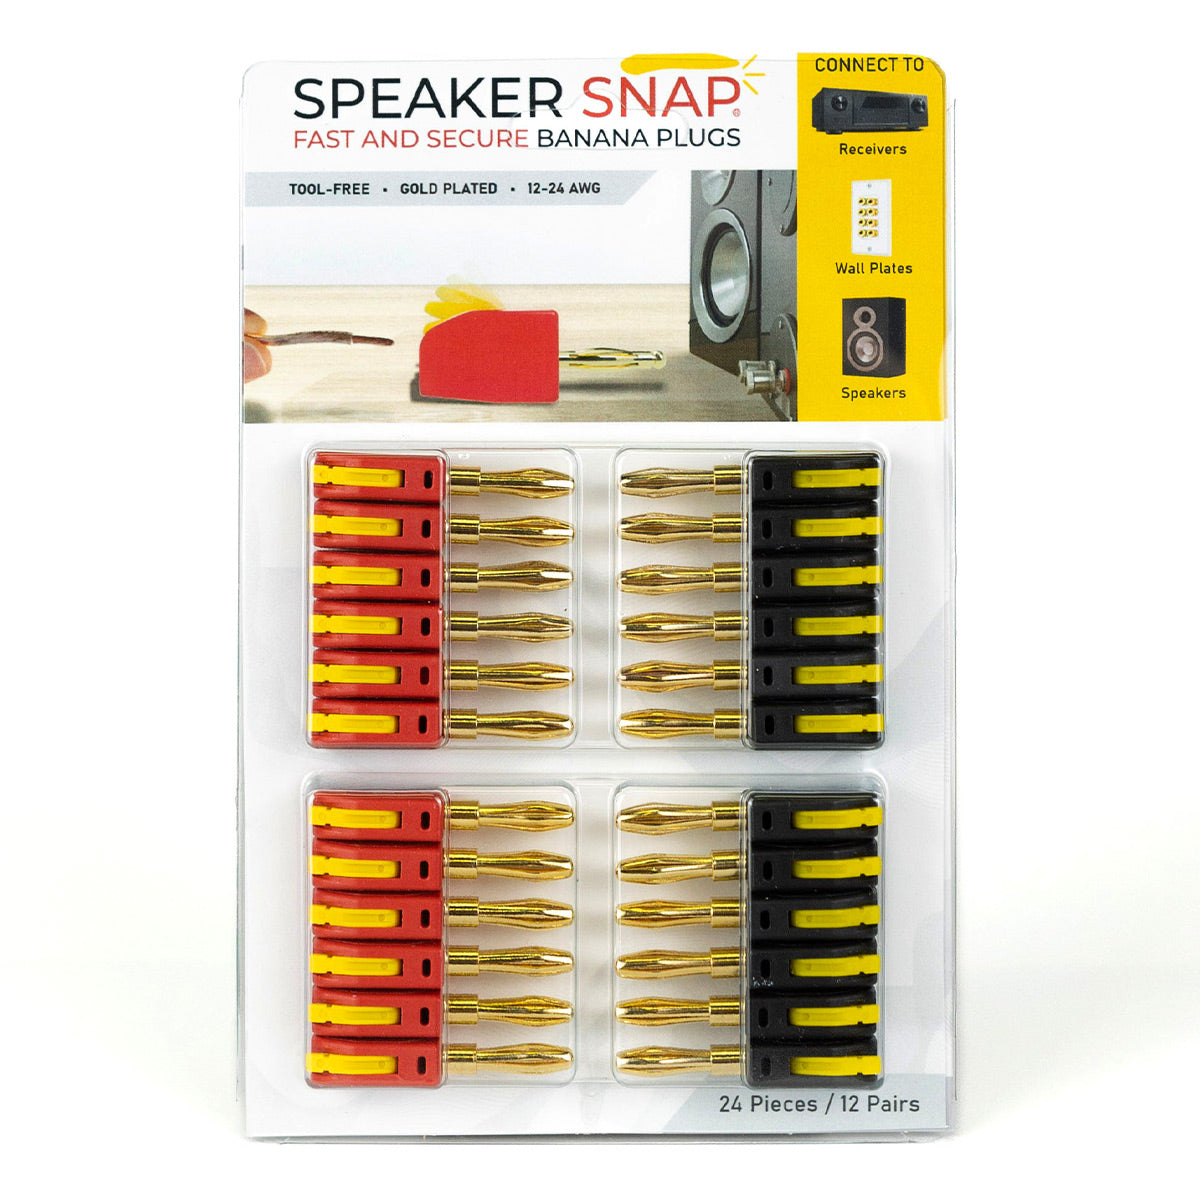 Speaker Snap 24 Count of Fast & Secure Banana Plugs, Gold Plated, 12-24 AWG, for Home Theaters, Speaker Wire, Wall Plates, and Receivers